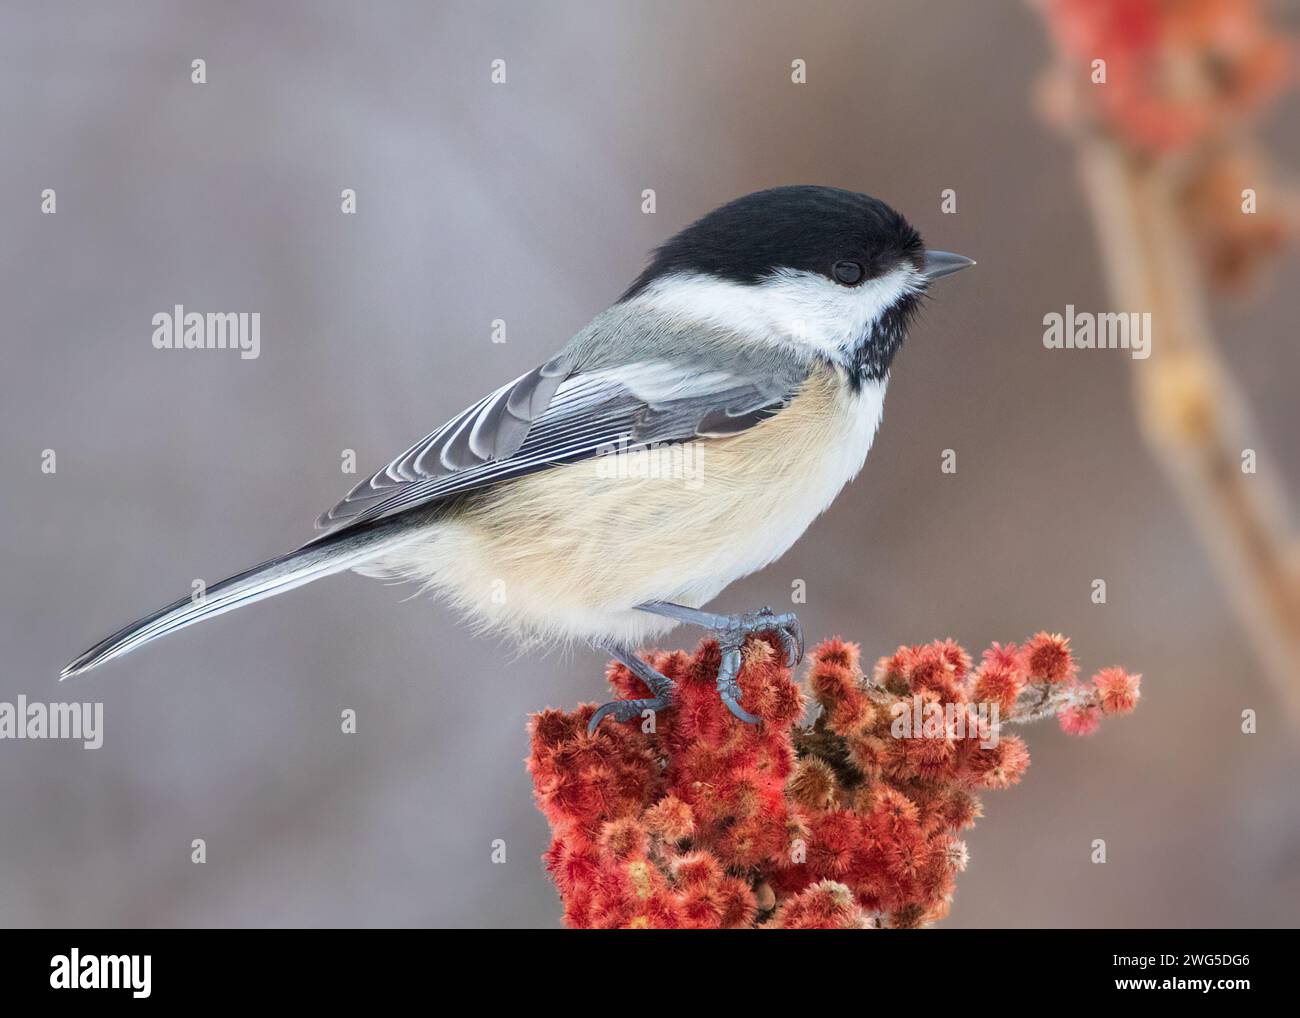 Black-capped Chickadee standing on red fruits of Staghorn Sumac shrub Stock Photo